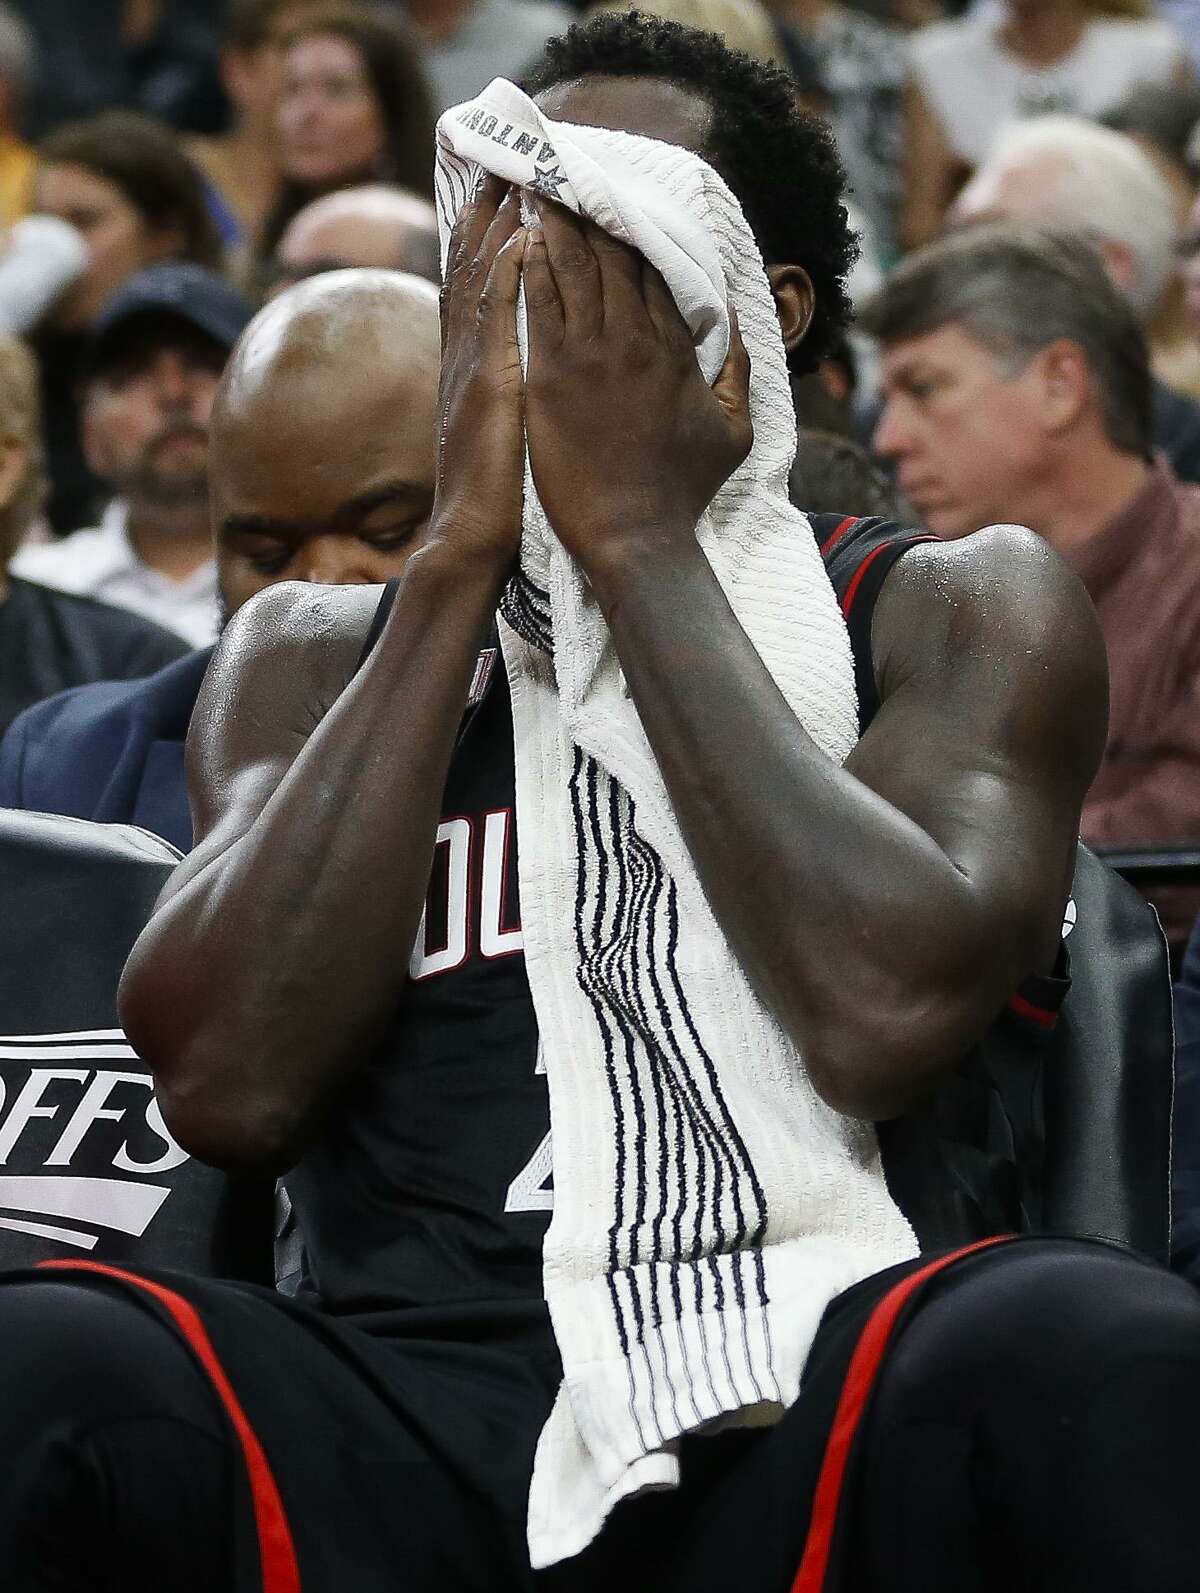 Rockets guard Patrick Beverley wipes his face as he sits down on the bench during the second half of Game 5 against the Spurs at the AT&T Center on May 9, 2017, in San Antonio.